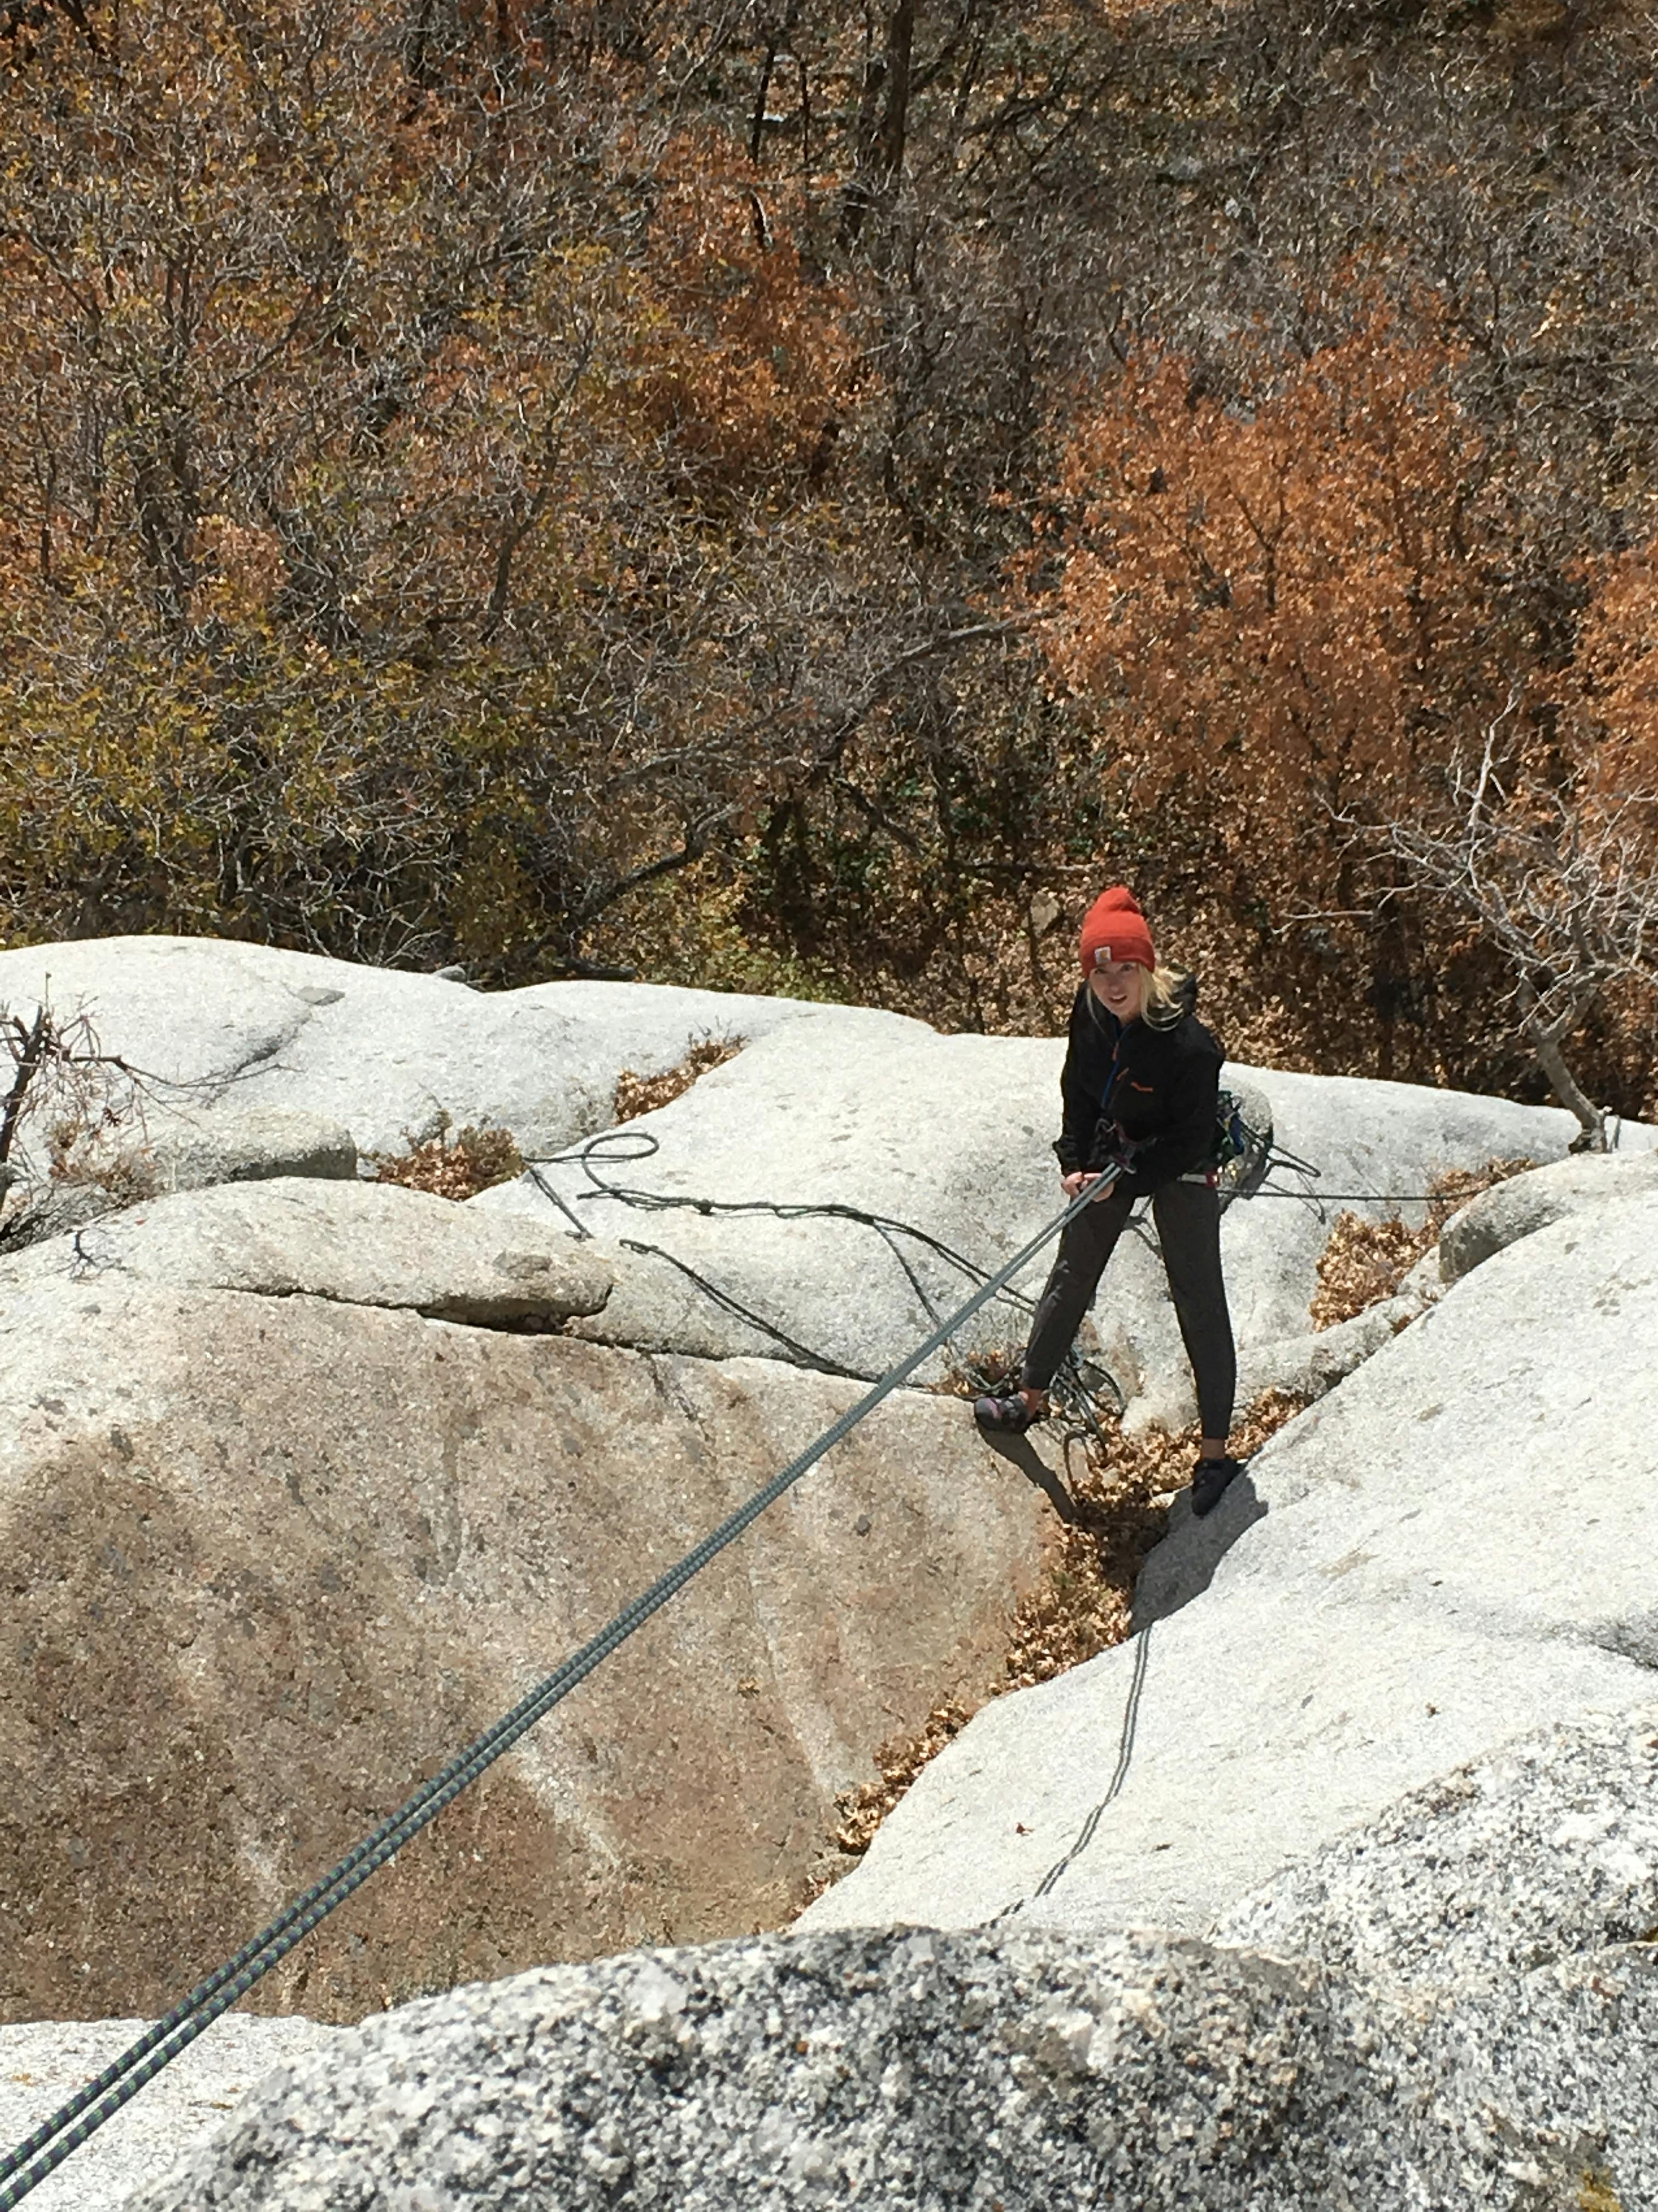 A rock climber on a rope looking up.